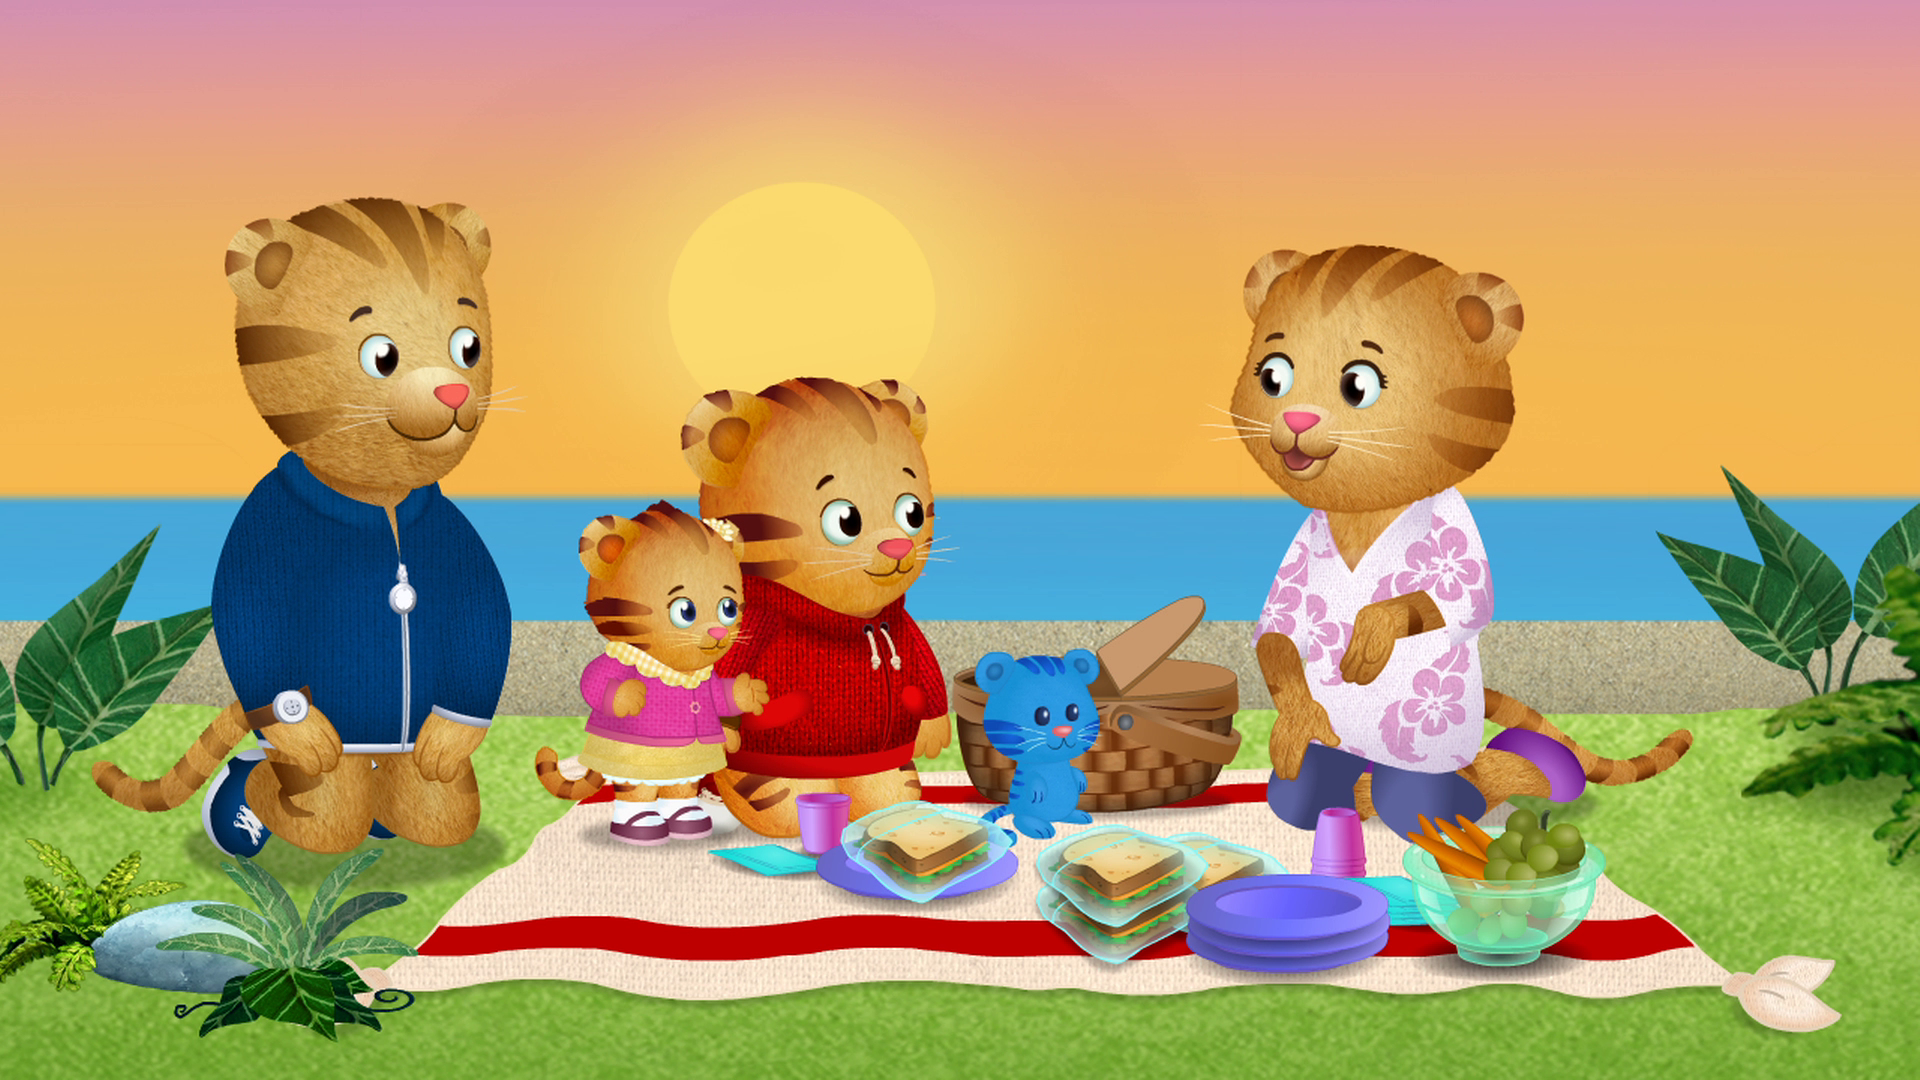 PBS Kids Celebrates the Fourth of July With Peg + Cat and Daniel